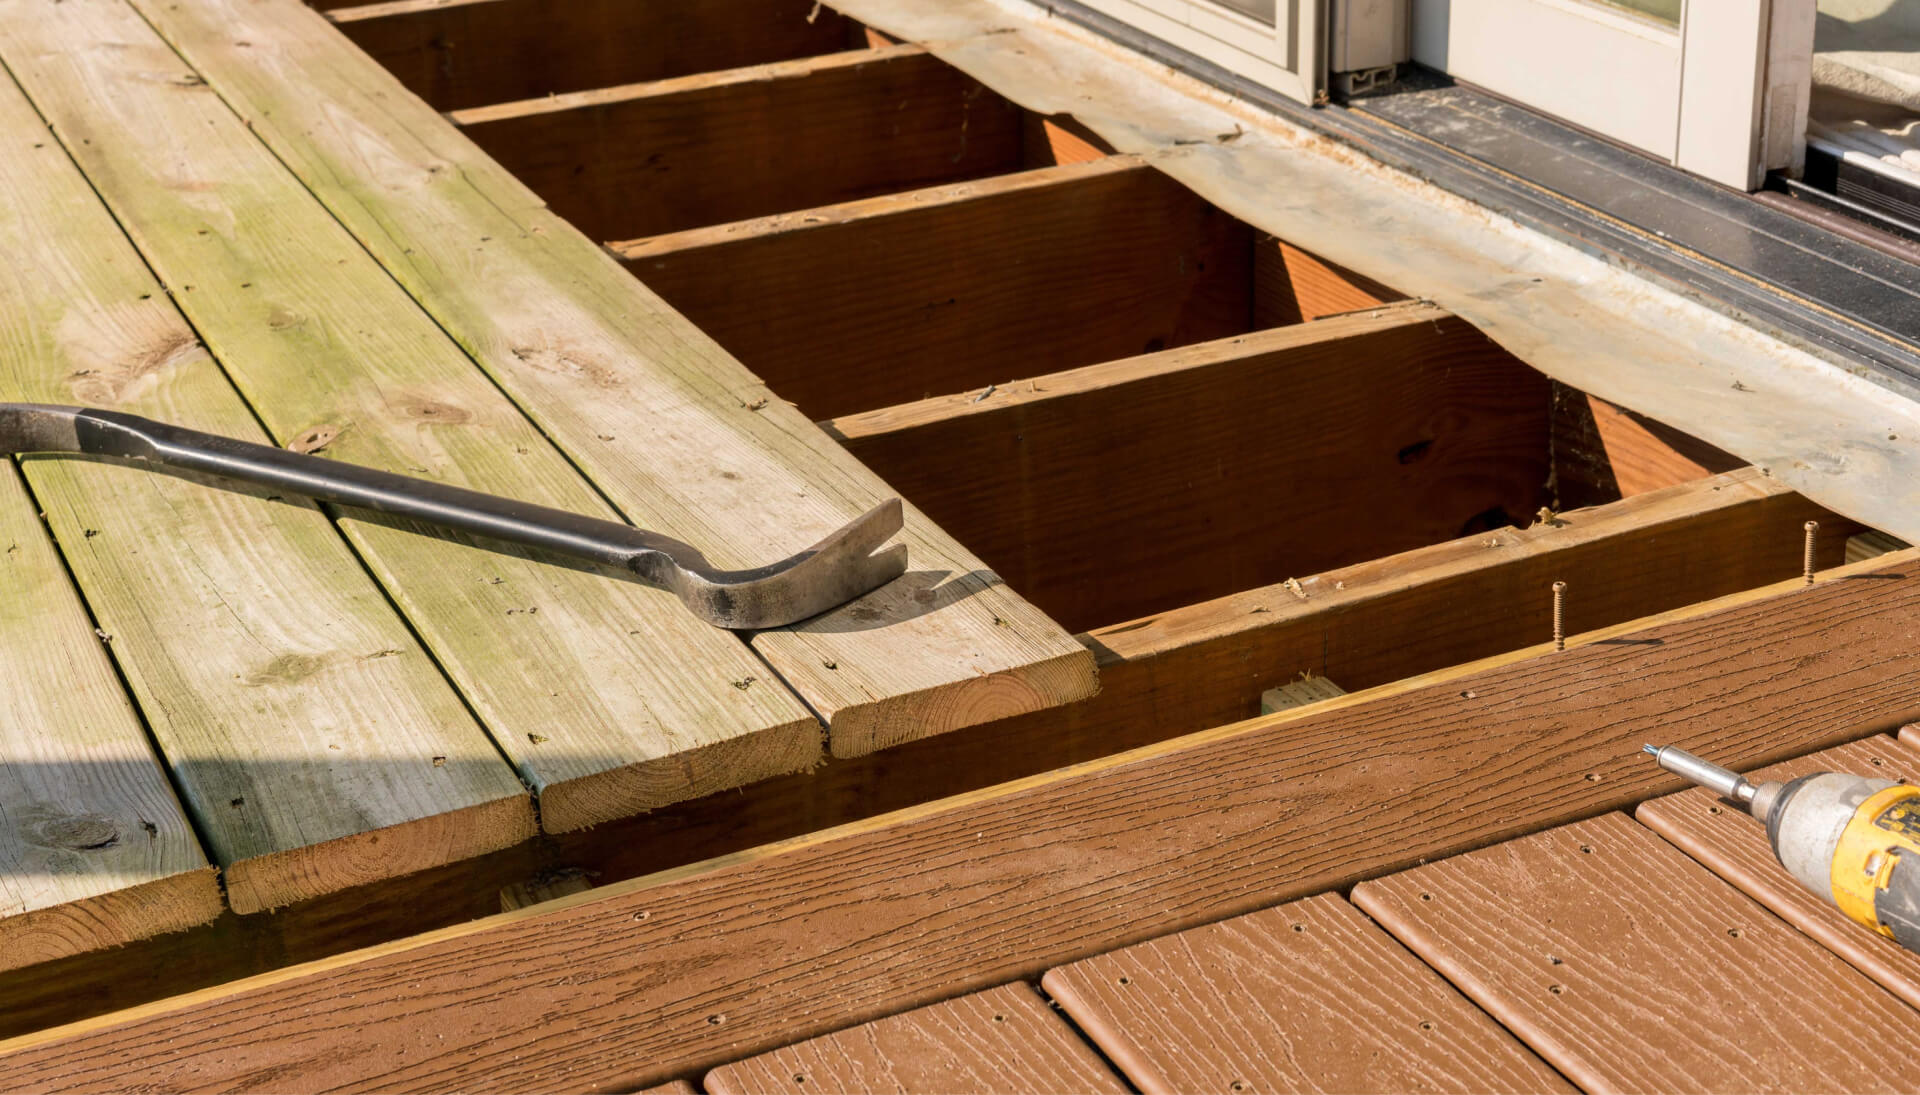 We offer the best deck repair services in Baltimore, MD